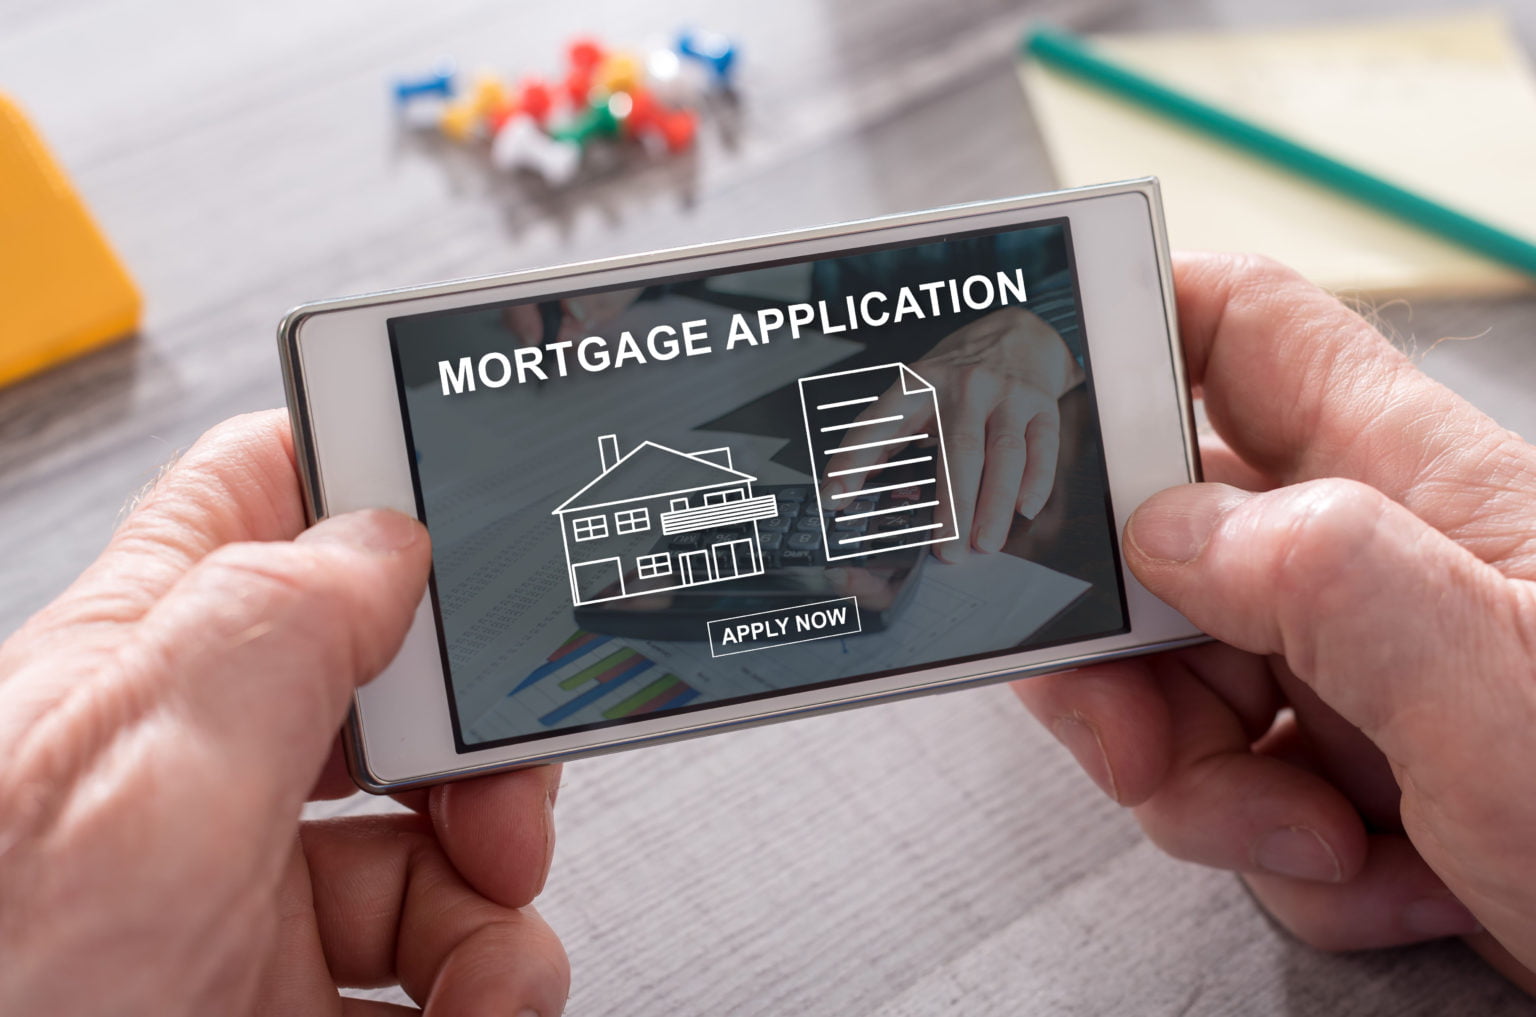 Mortgage application displayed on a mobile phone